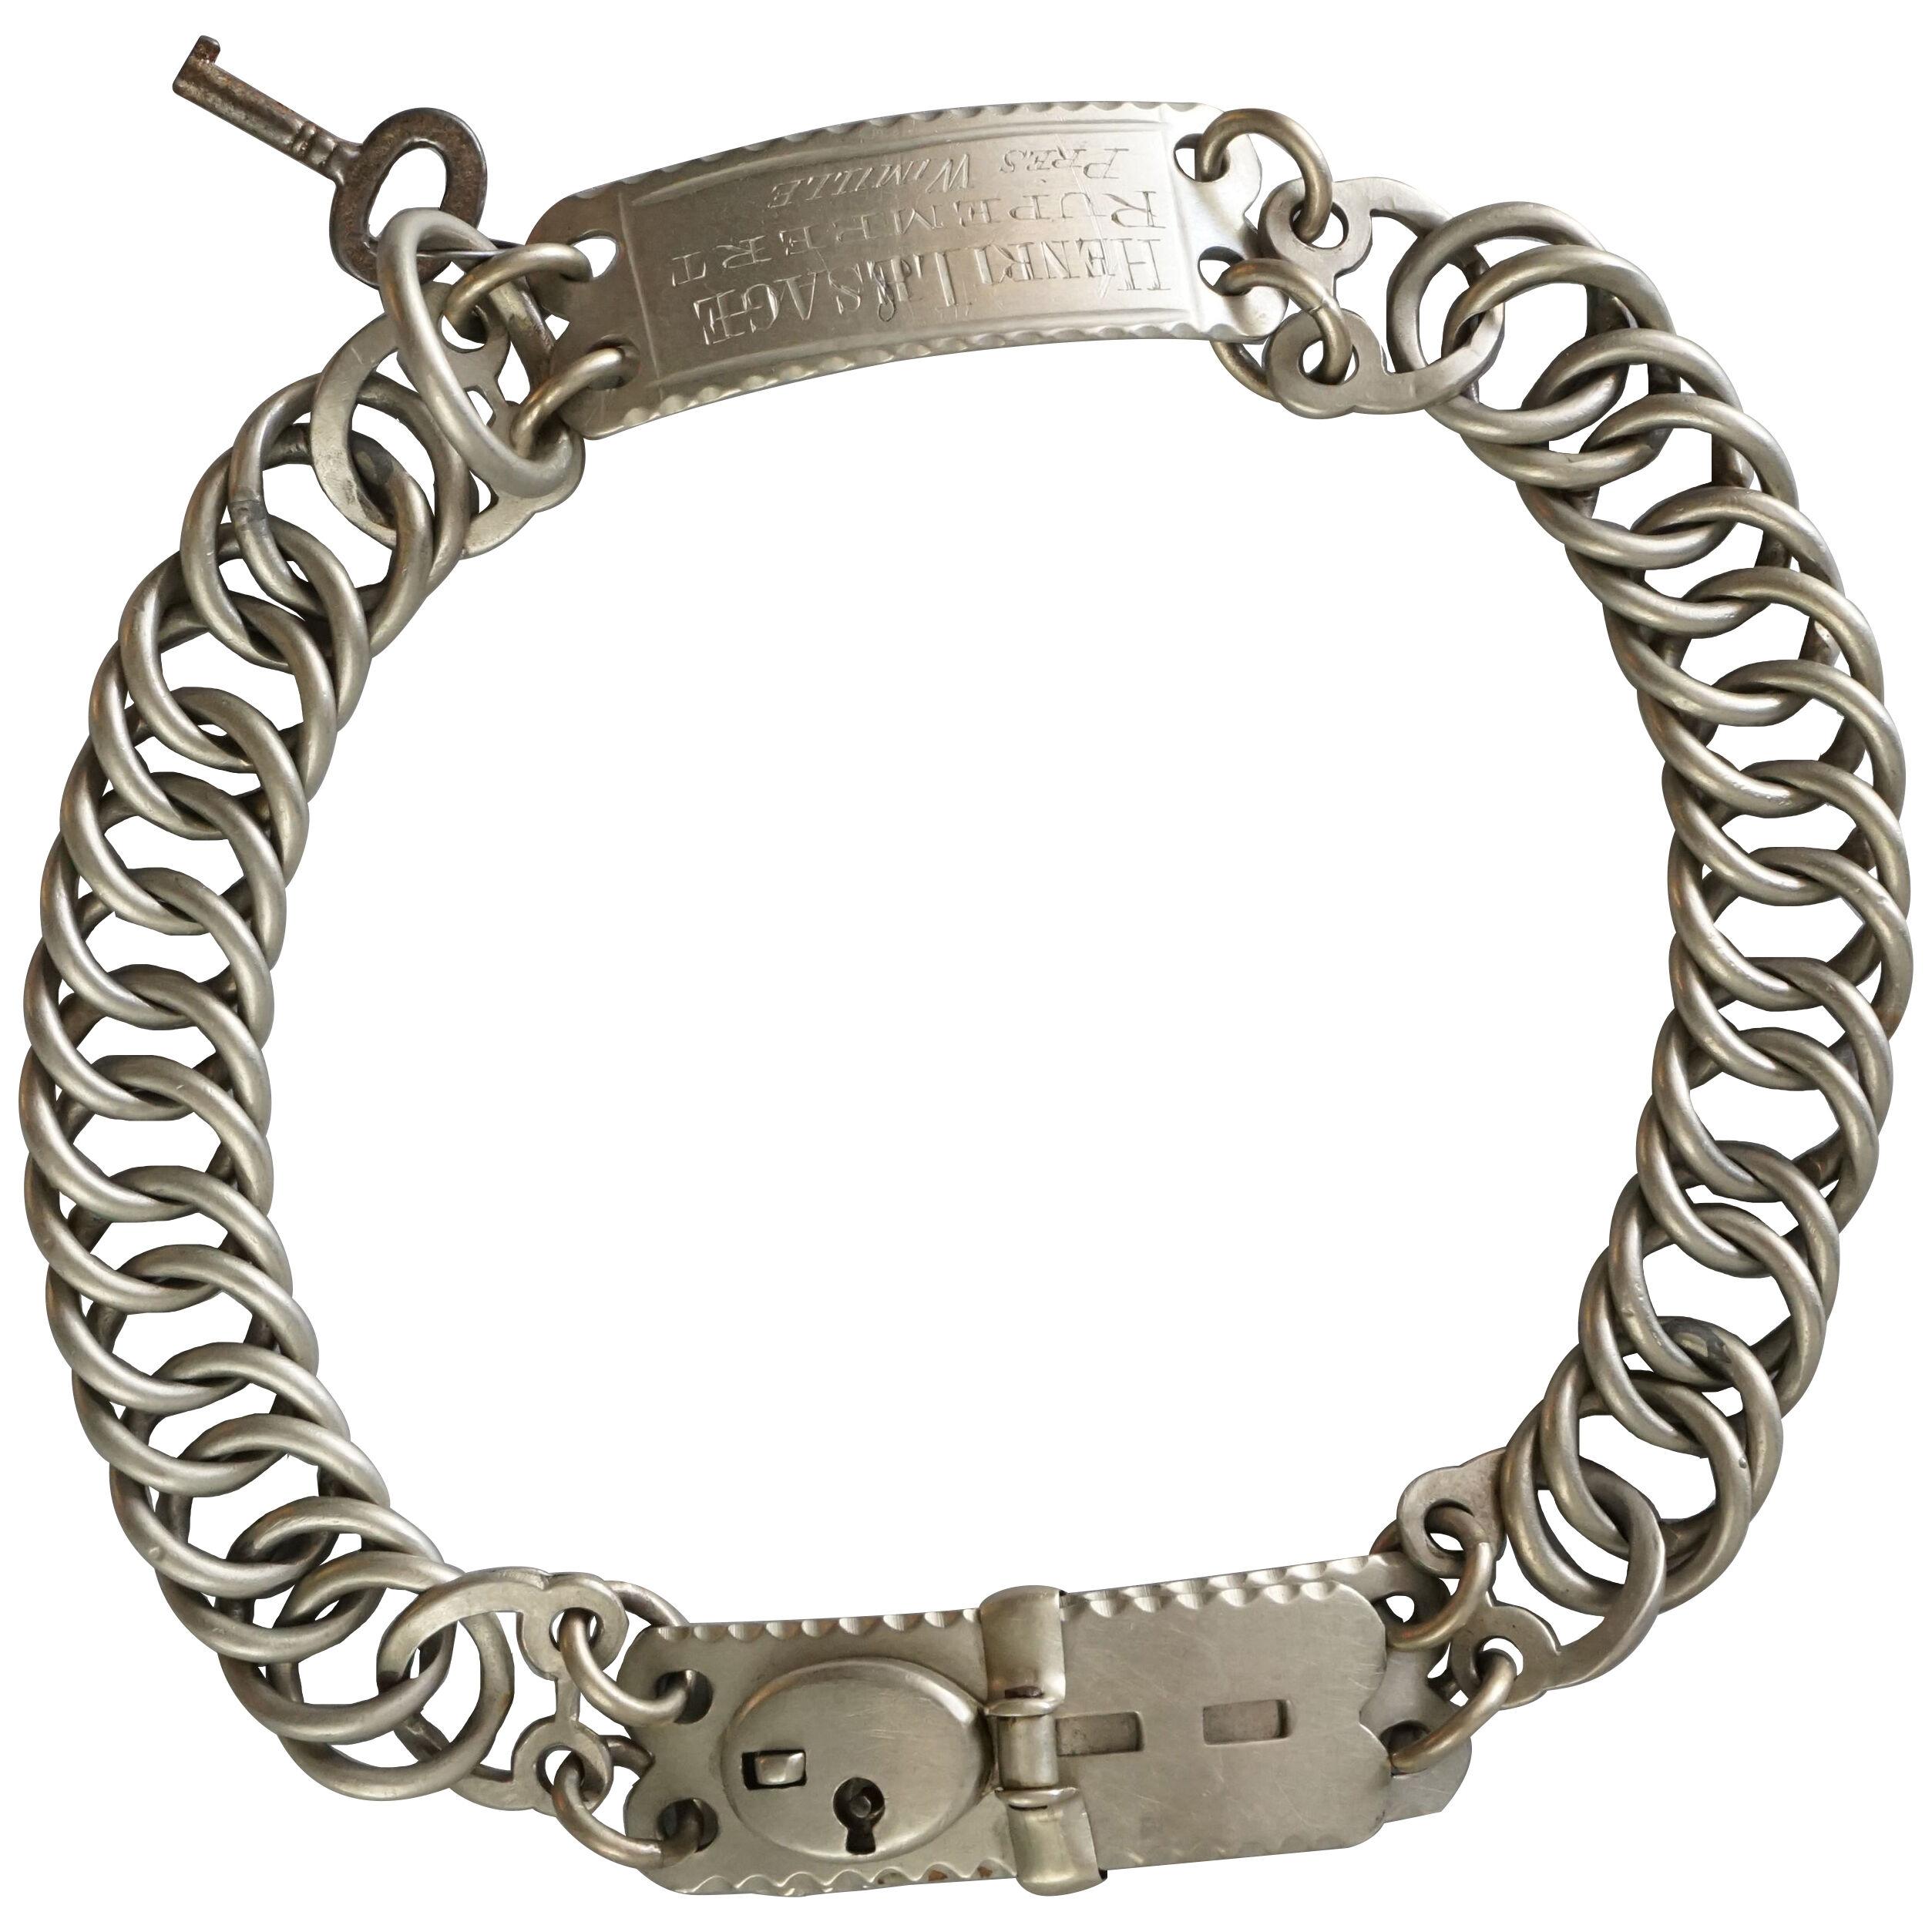 19th Century Nickel Silver French Adjustable Linked Dog Collar with Lock and Key